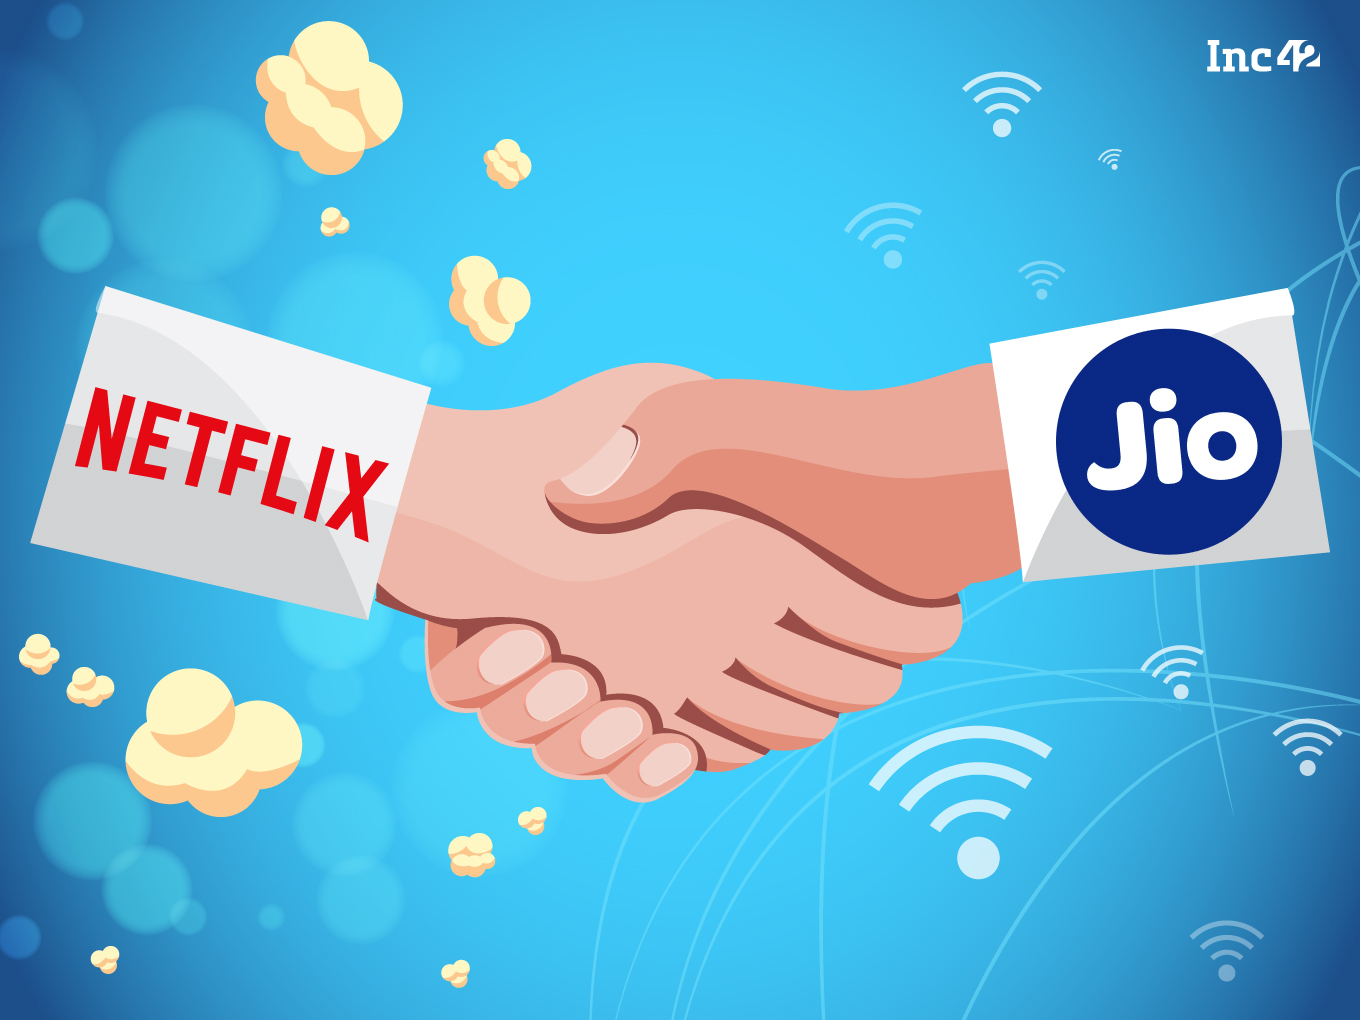 Can Netflixs Partnership With Jio Revive Its Indian Streaming Dreams?